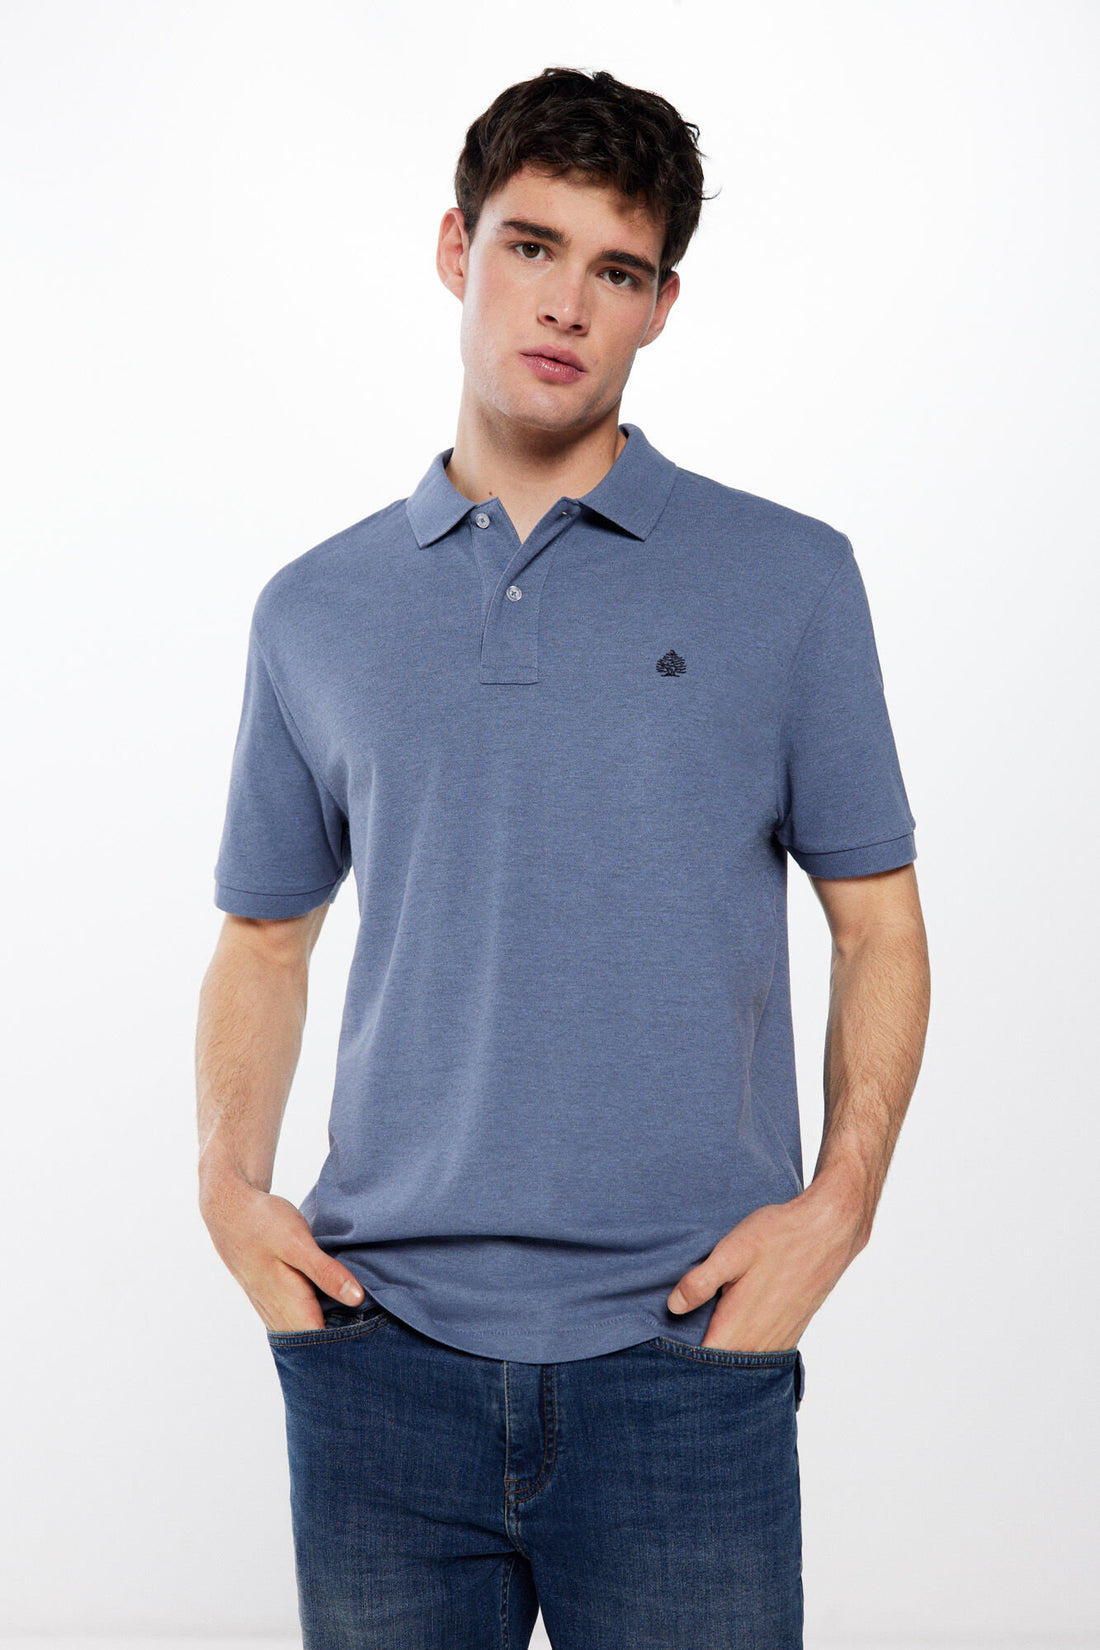 Classic Polo Shirt With Logo_4407009_15_01